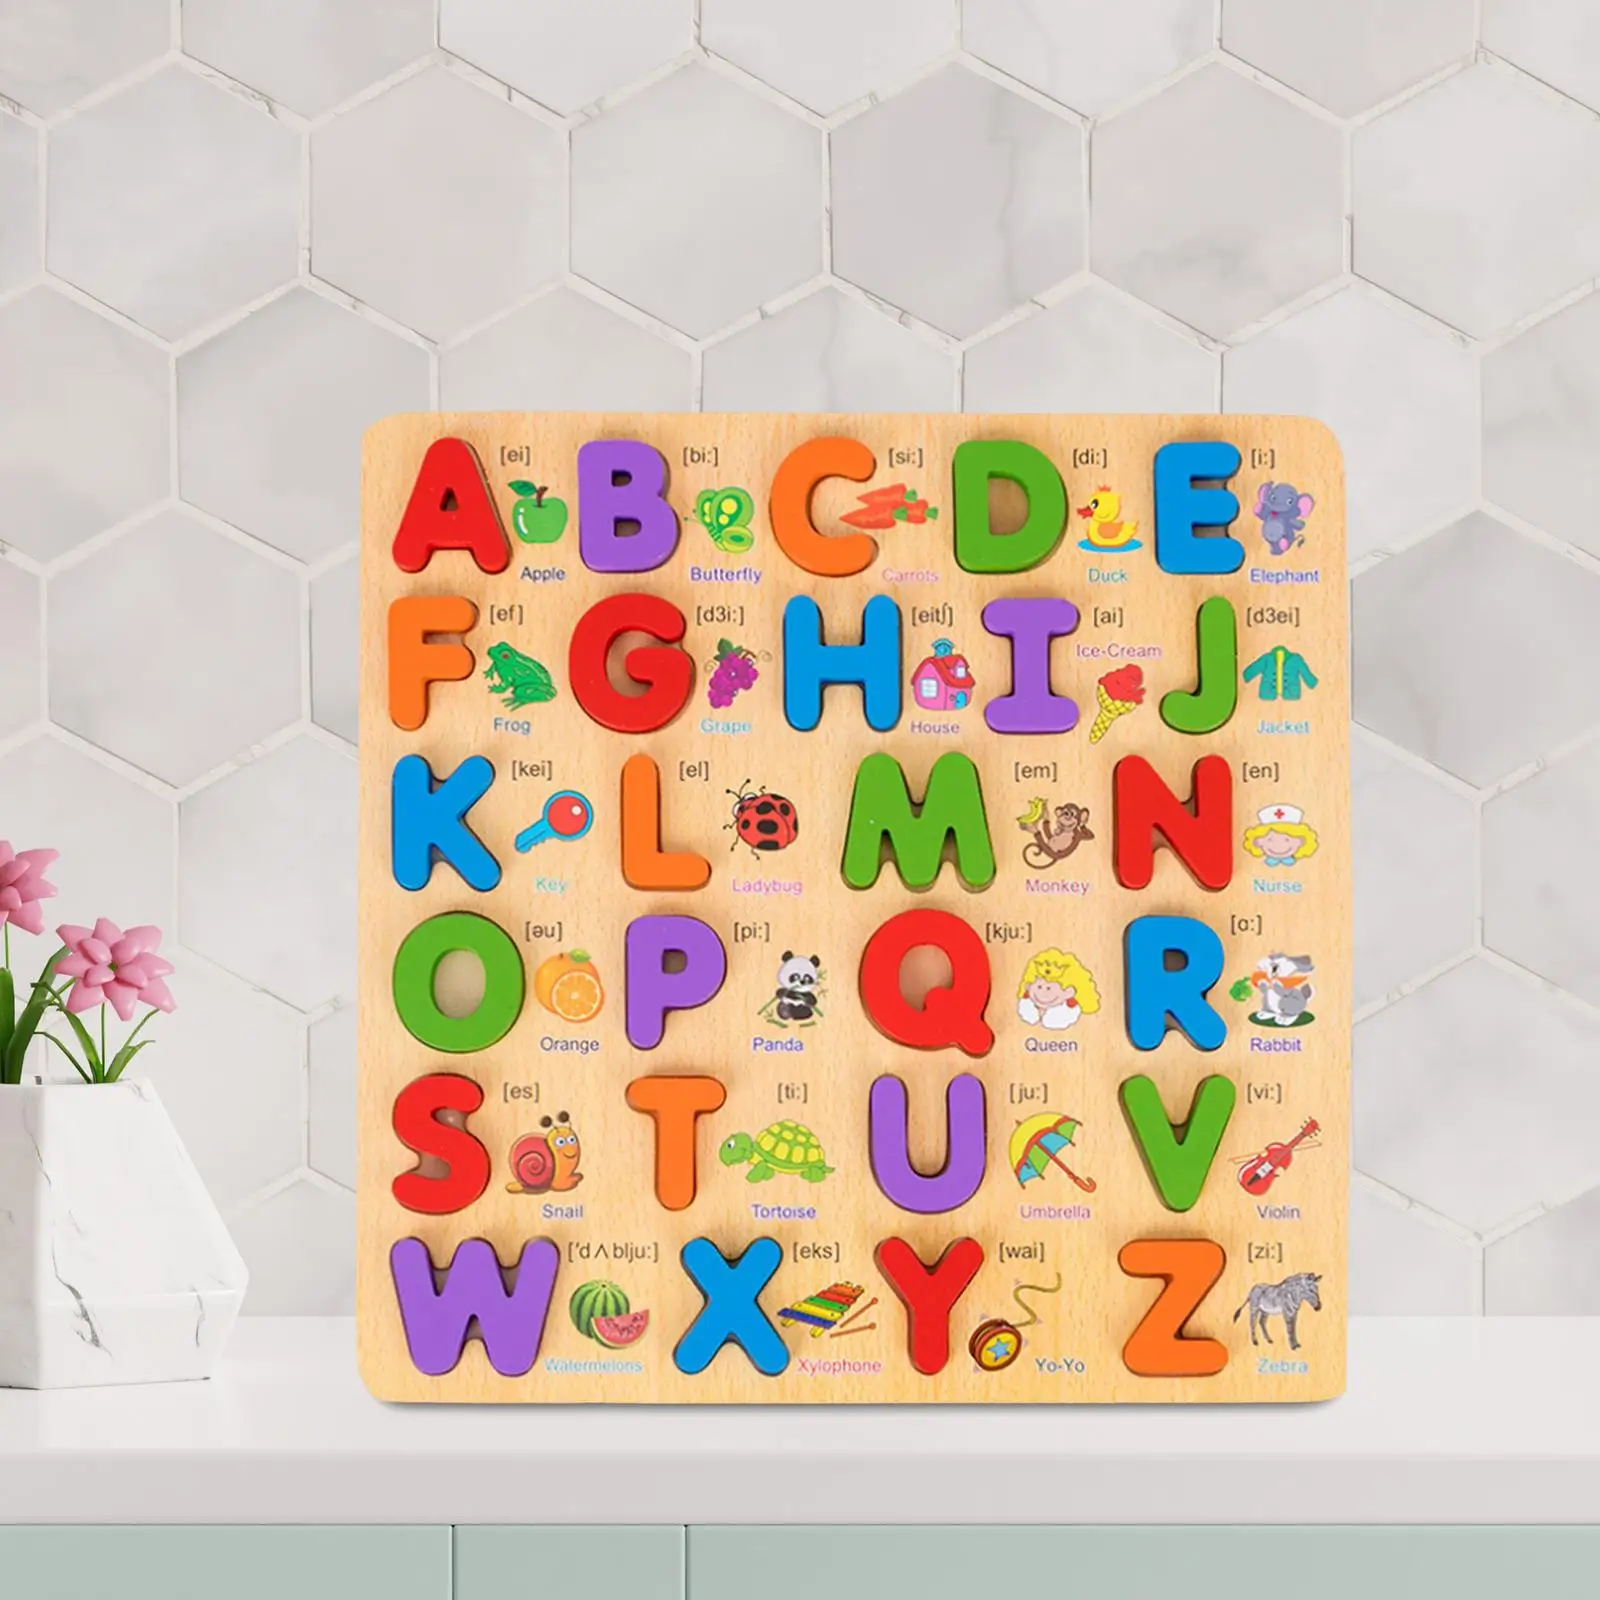 Alphabet Puzzles Gifts Learning Alphabet Practice Educational Developmental Toy Learning Alphabet Number Colorful Girls and Boys